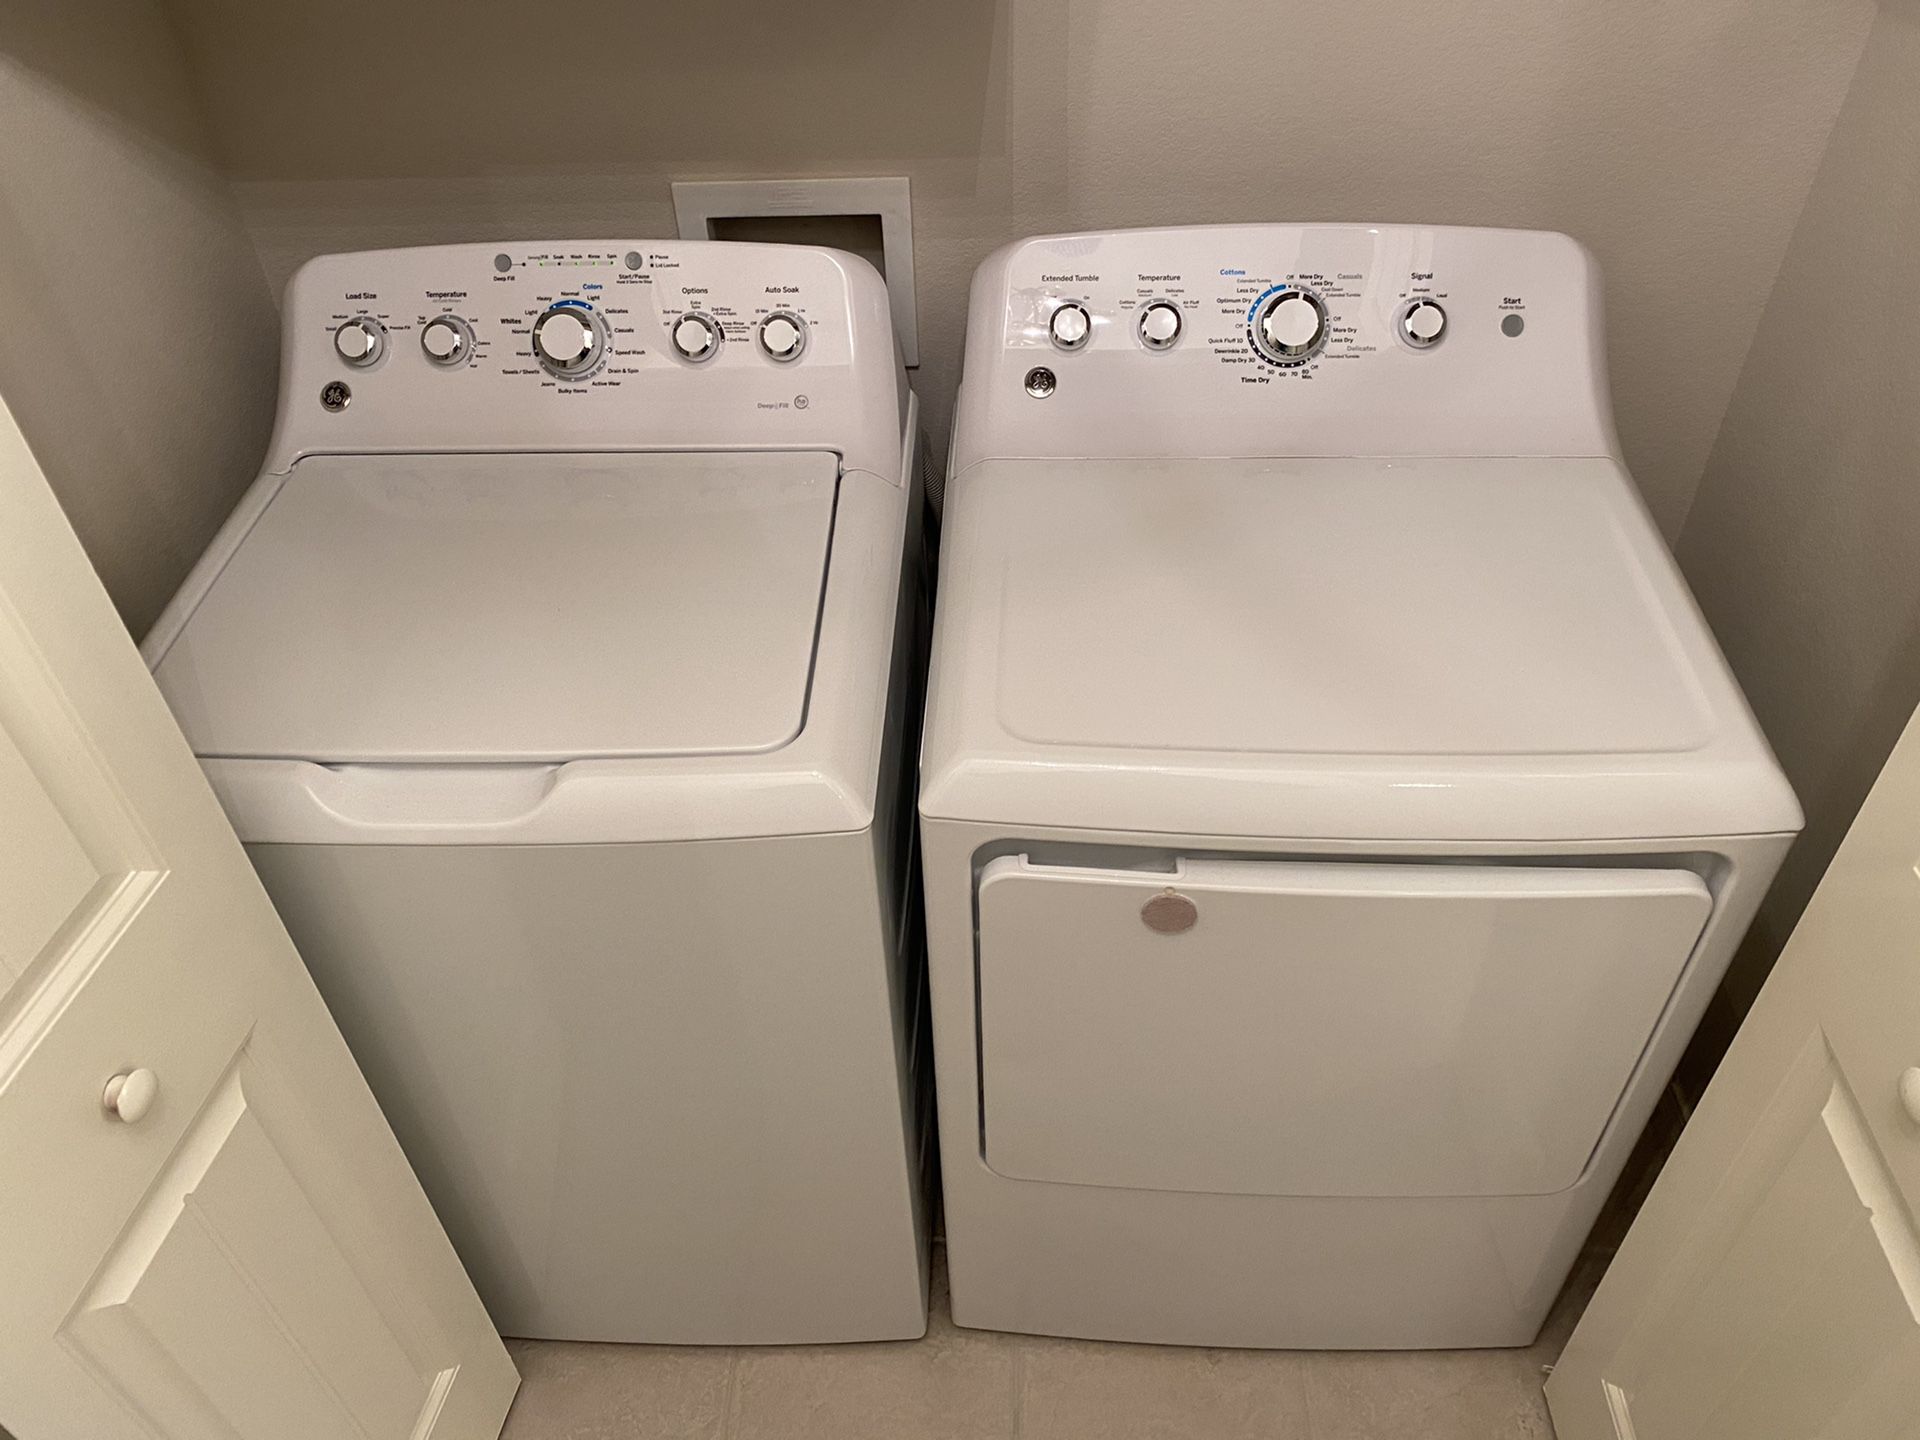 GE Washer & Dryer - 2 Years Old